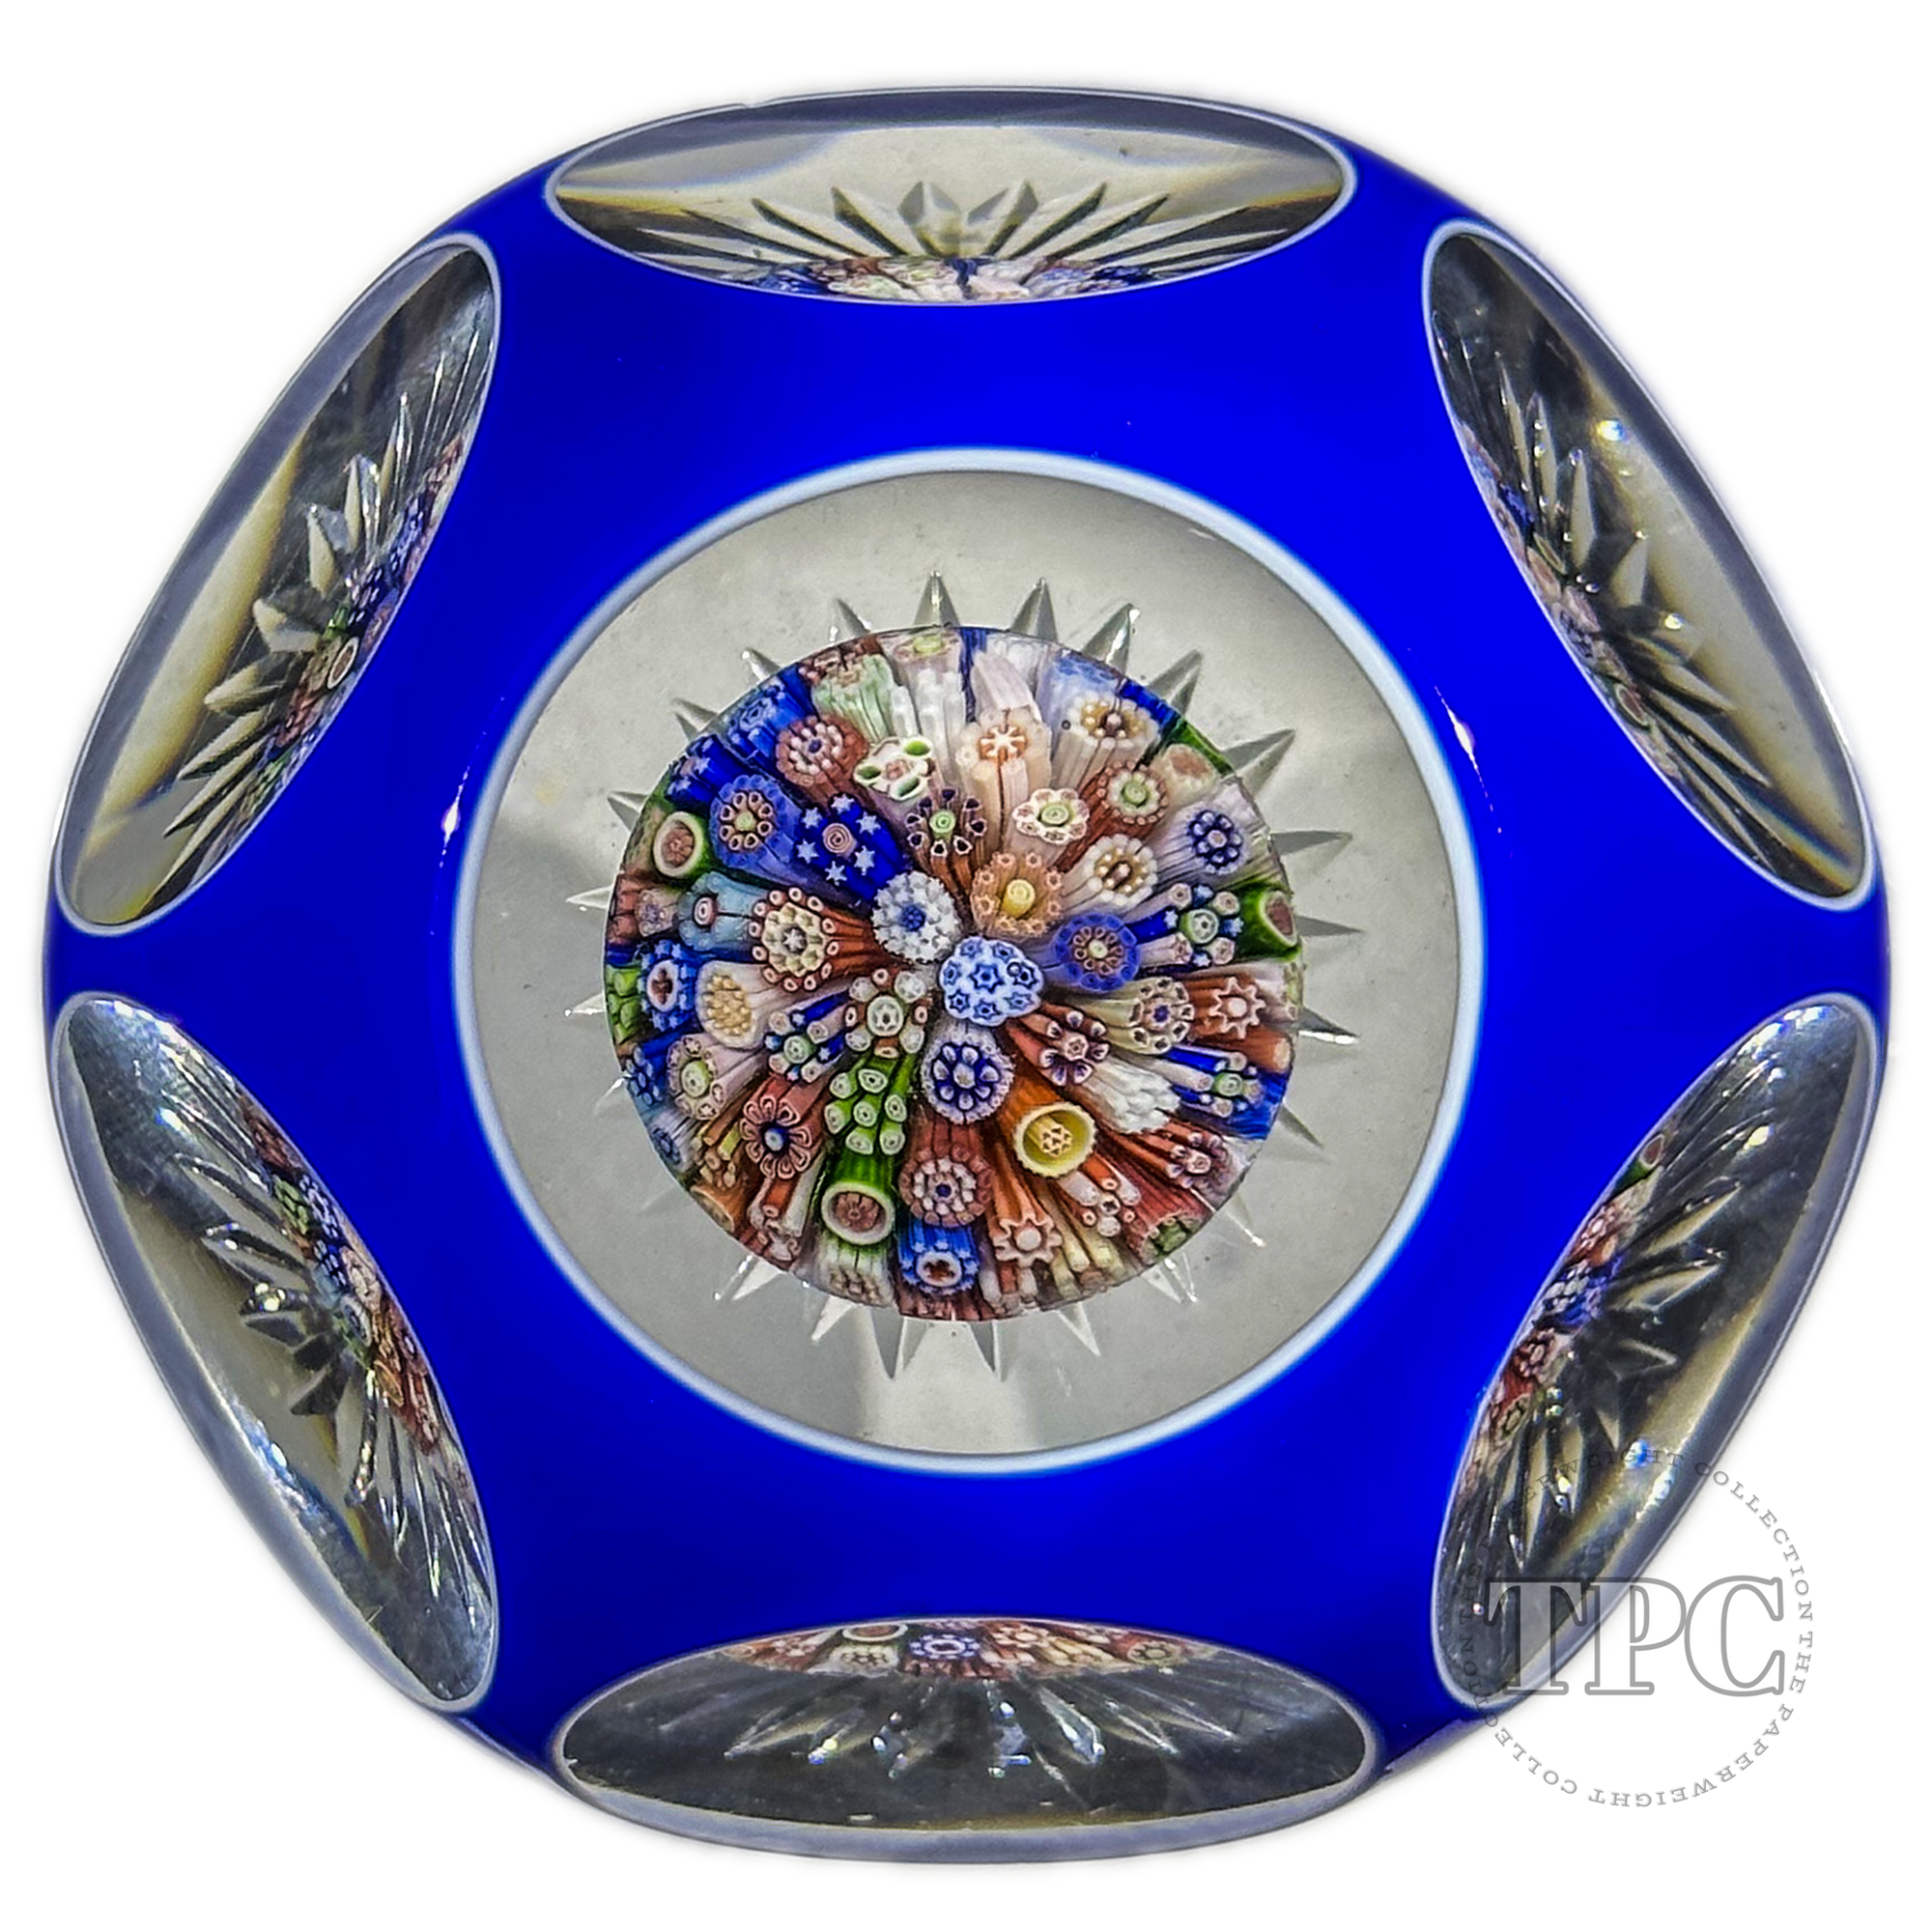 Very Rare Antique Baccarat Glass Paperweight Faceted Blue Double overlay with Complex Millefiori Clospack Mushroom